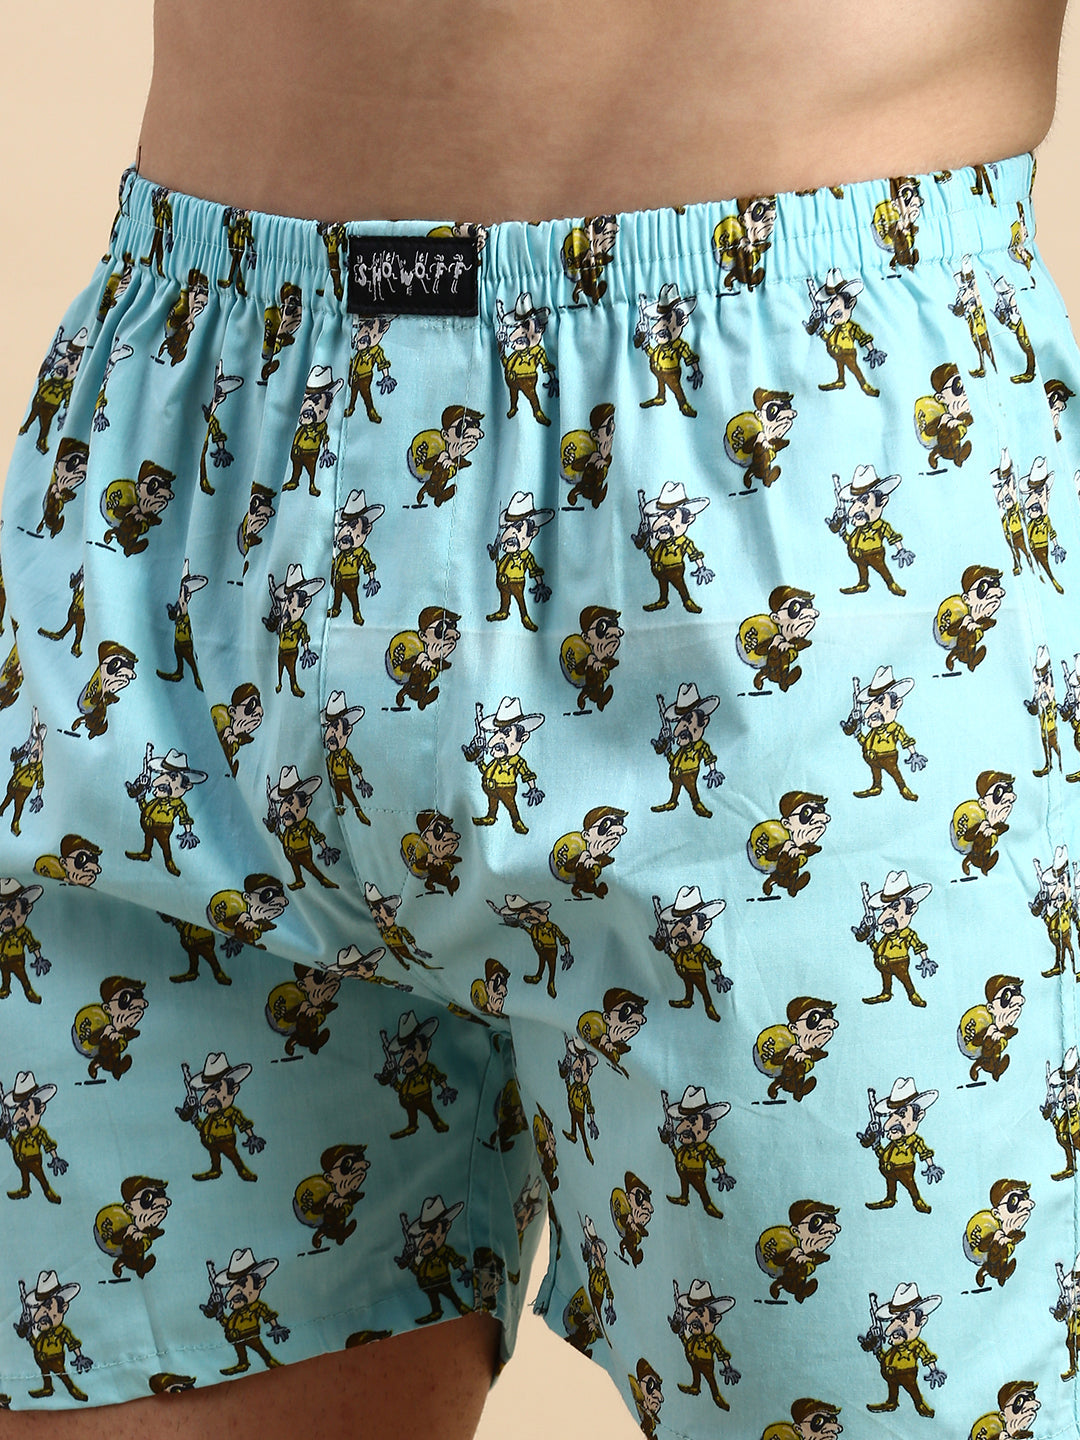 Men Printed Turquoise Blue Boxers